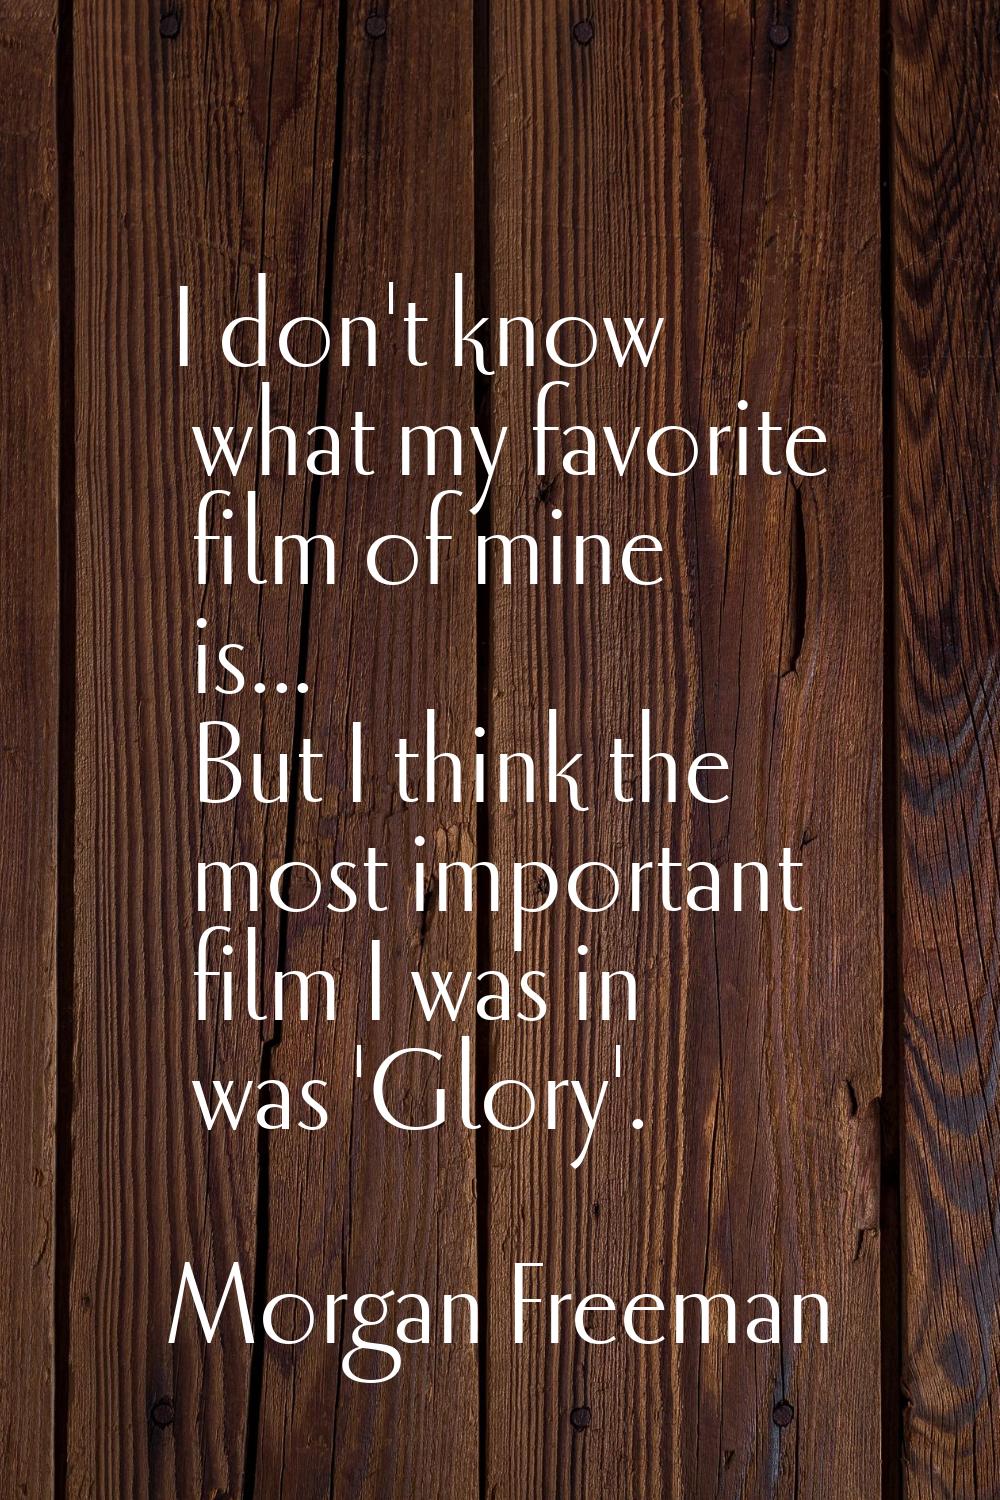 I don't know what my favorite film of mine is... But I think the most important film I was in was '